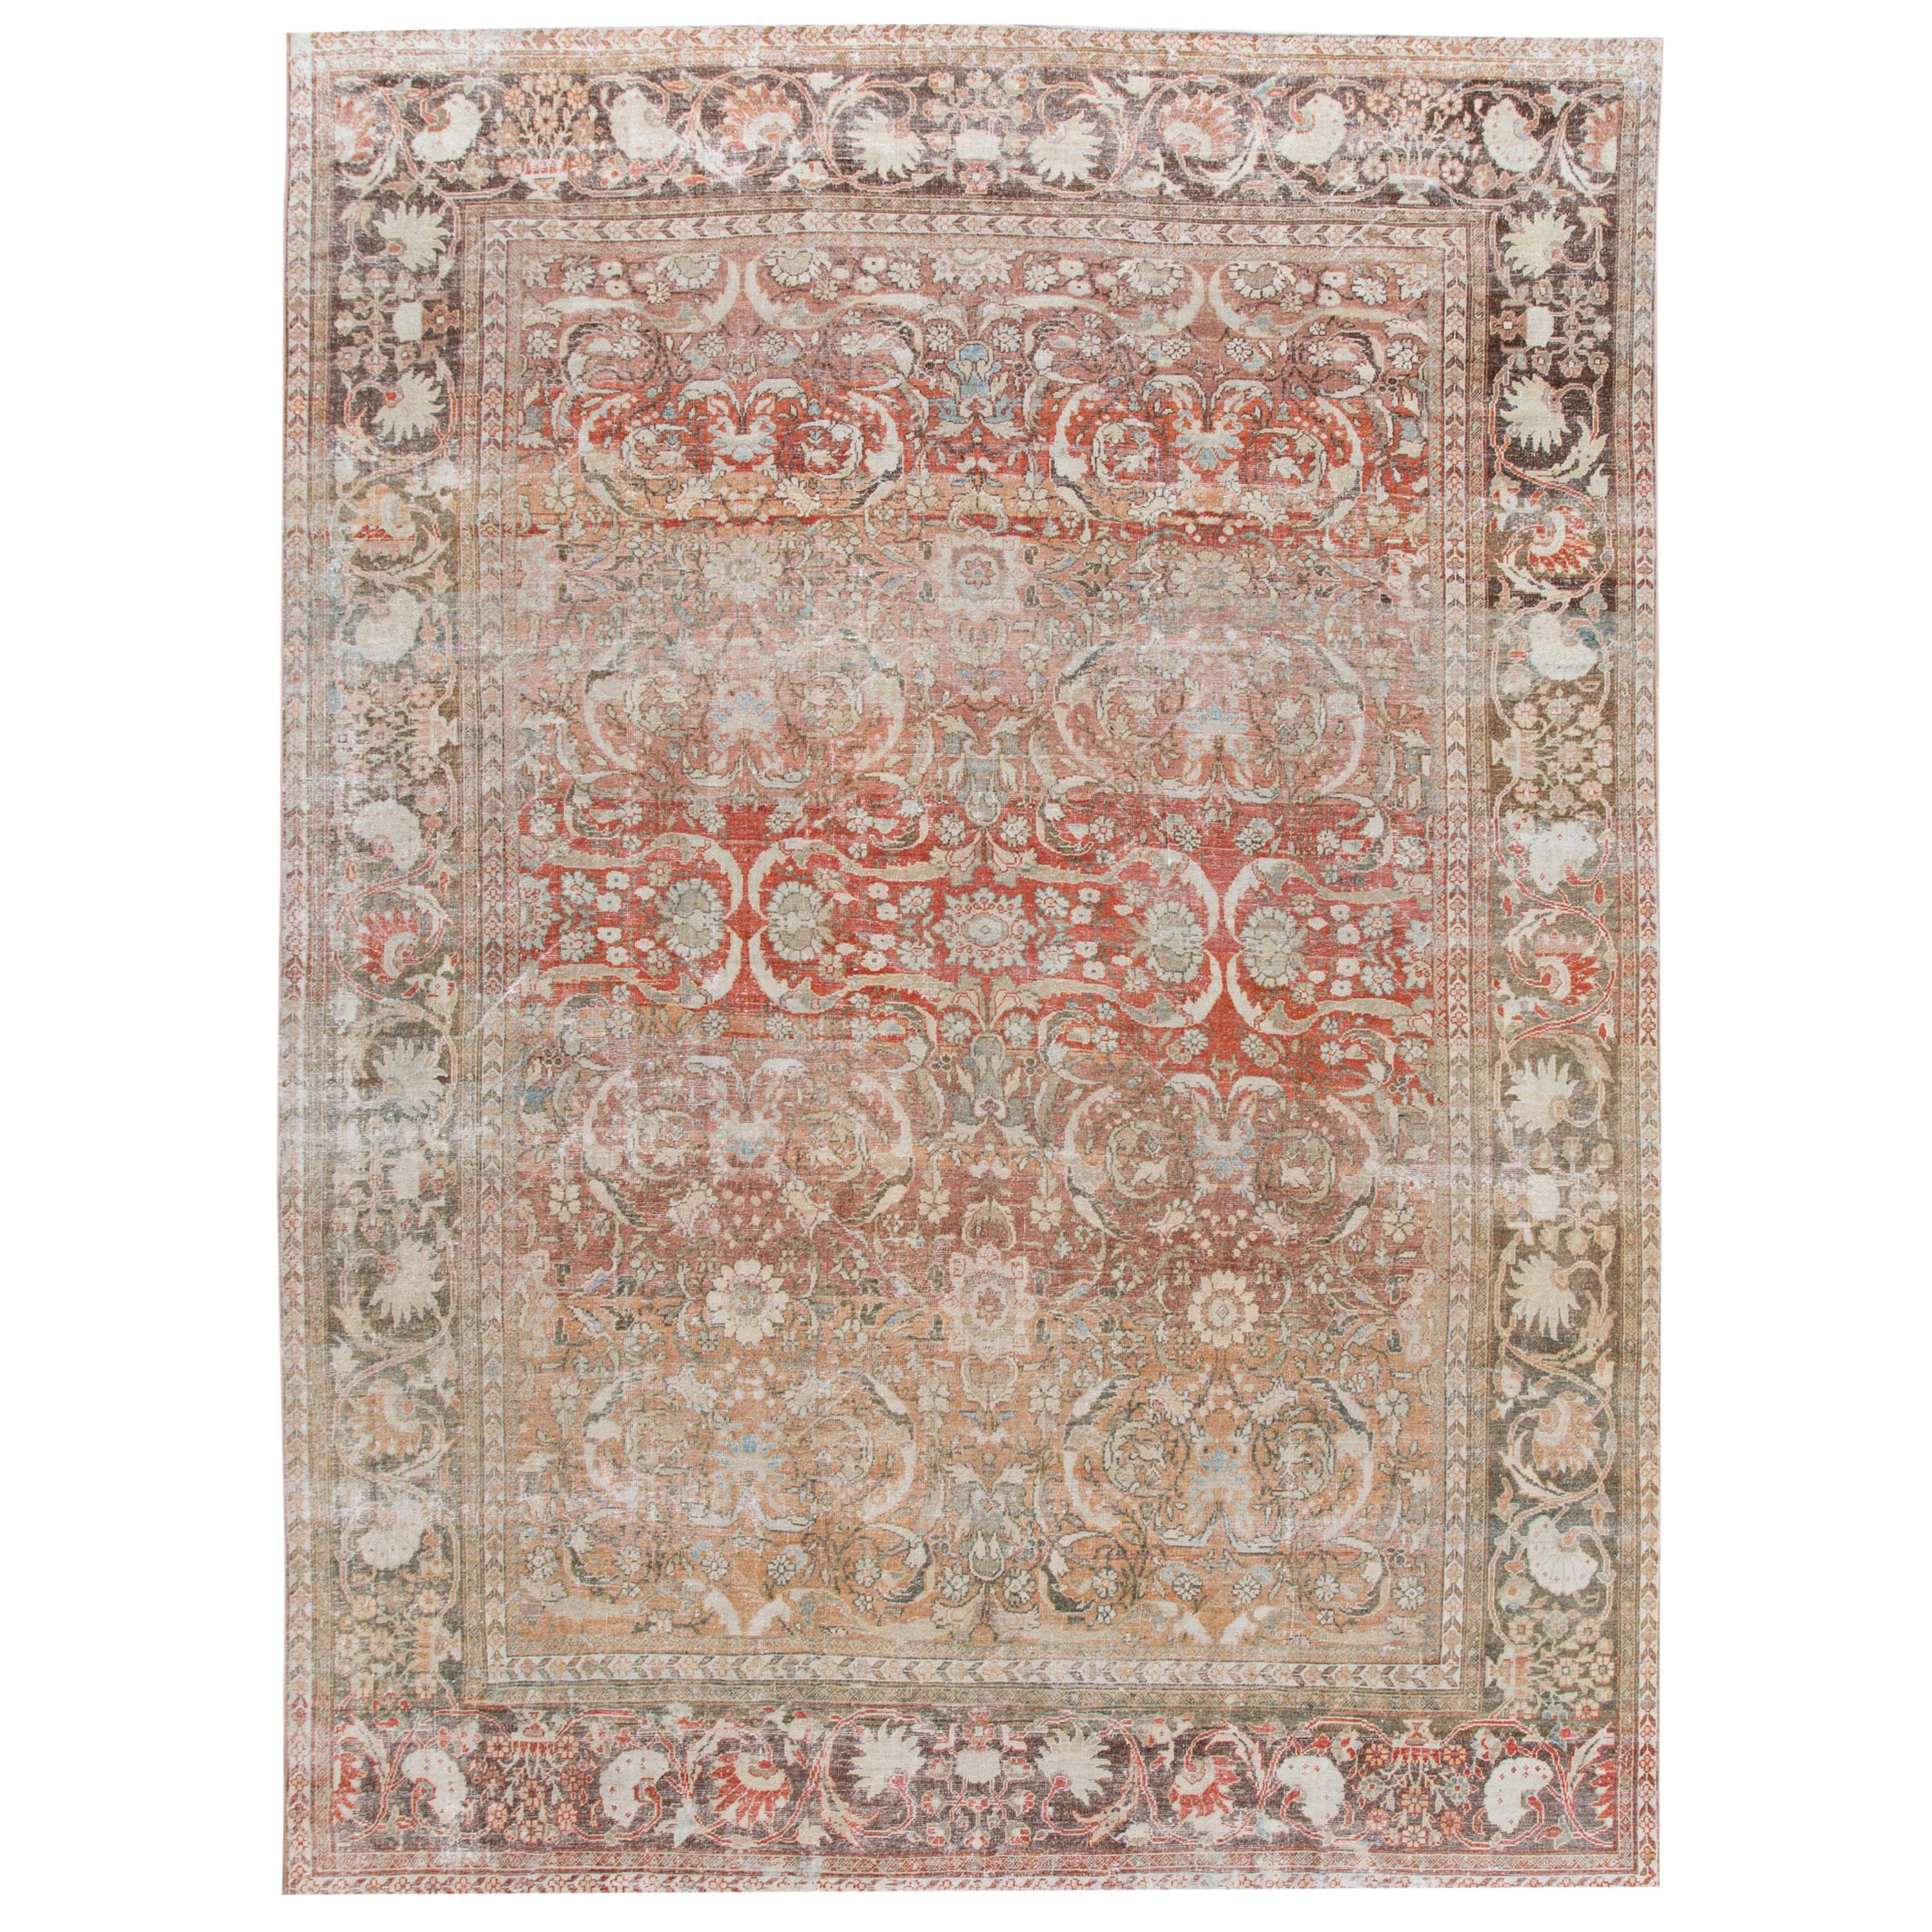 Antique Shabby Chic Red Mahal Wool Rug For Sale